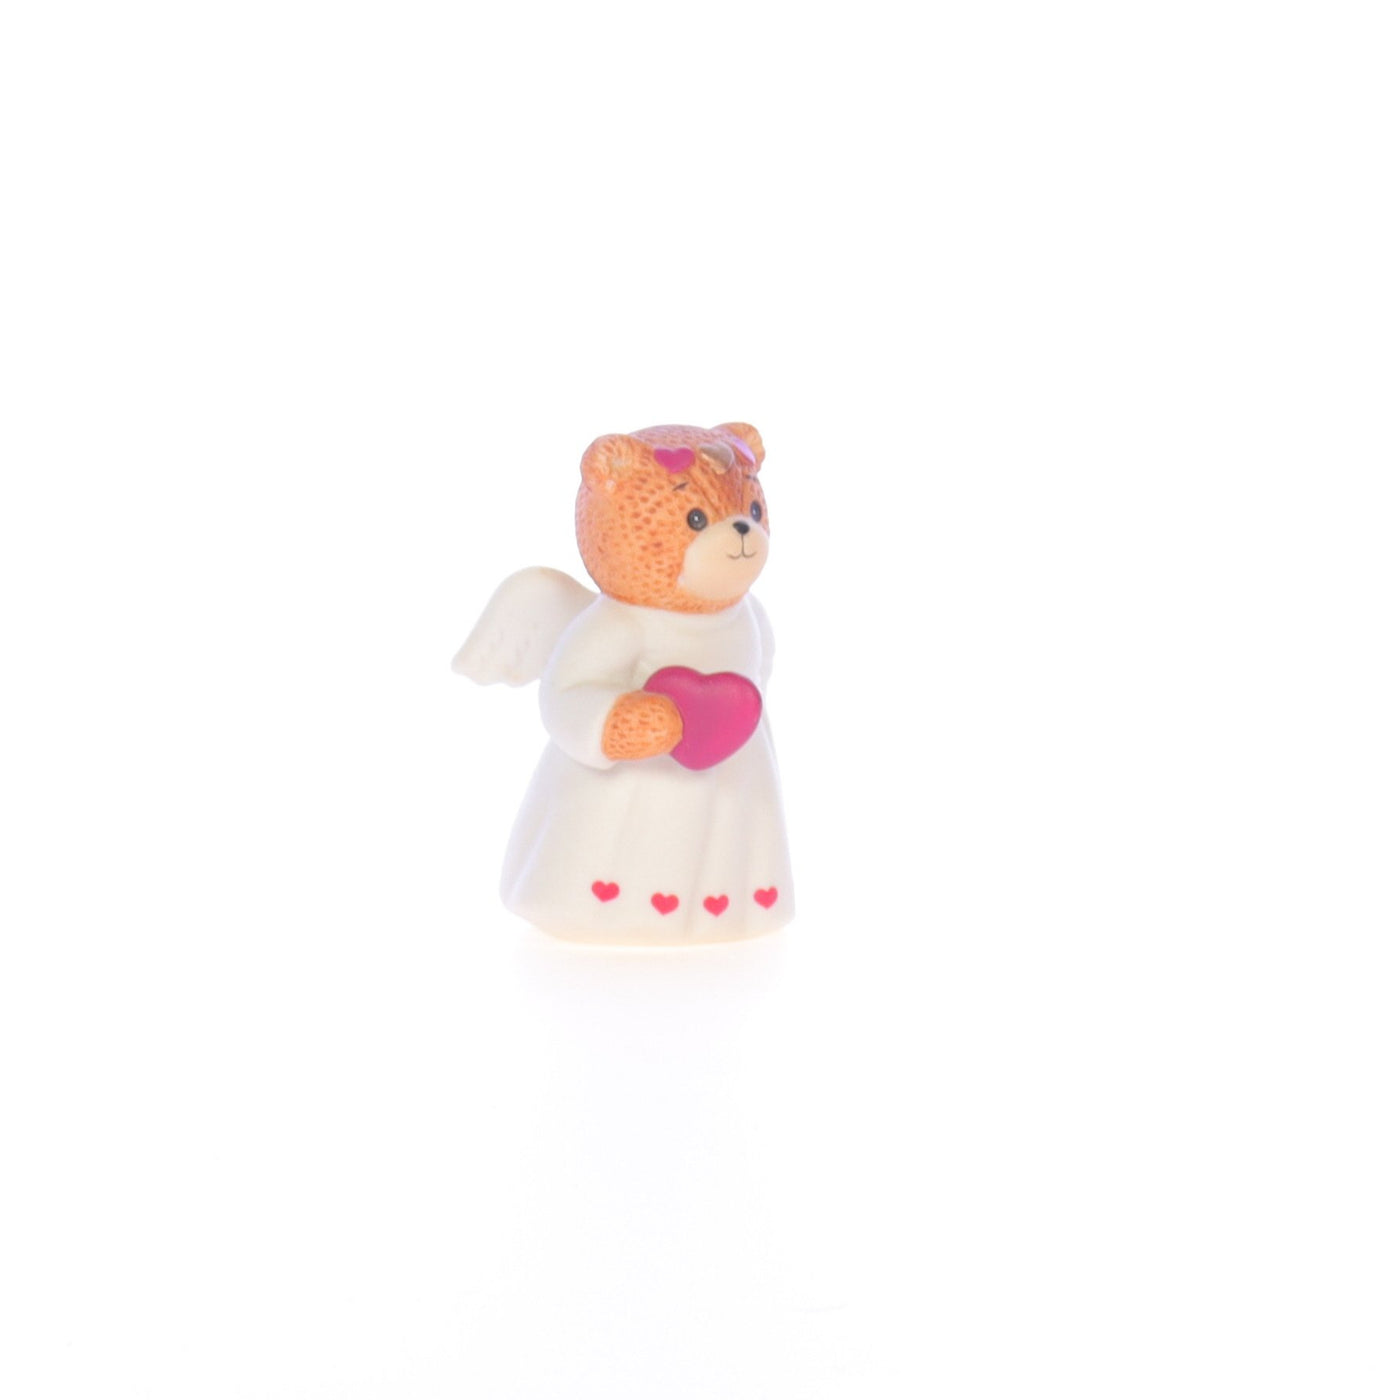 Lucy_And_Me_by_Lucy_Atwell_Porcelain_Figurine_Angel_of_Love_Bear_Lucy_Unknown_049_08